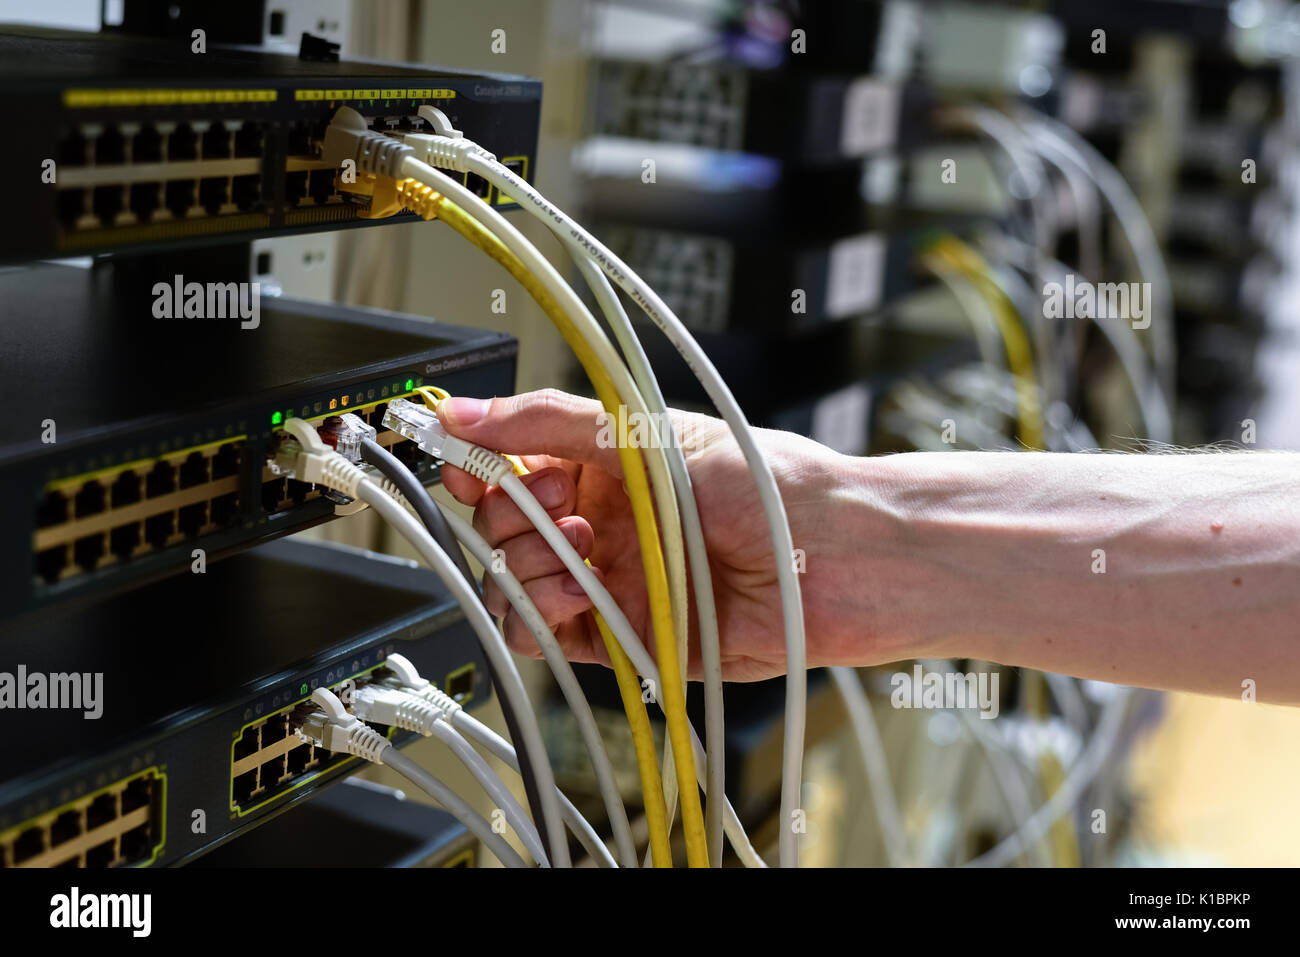 Hand with rj45 cable and network equipment on background Stock Photo